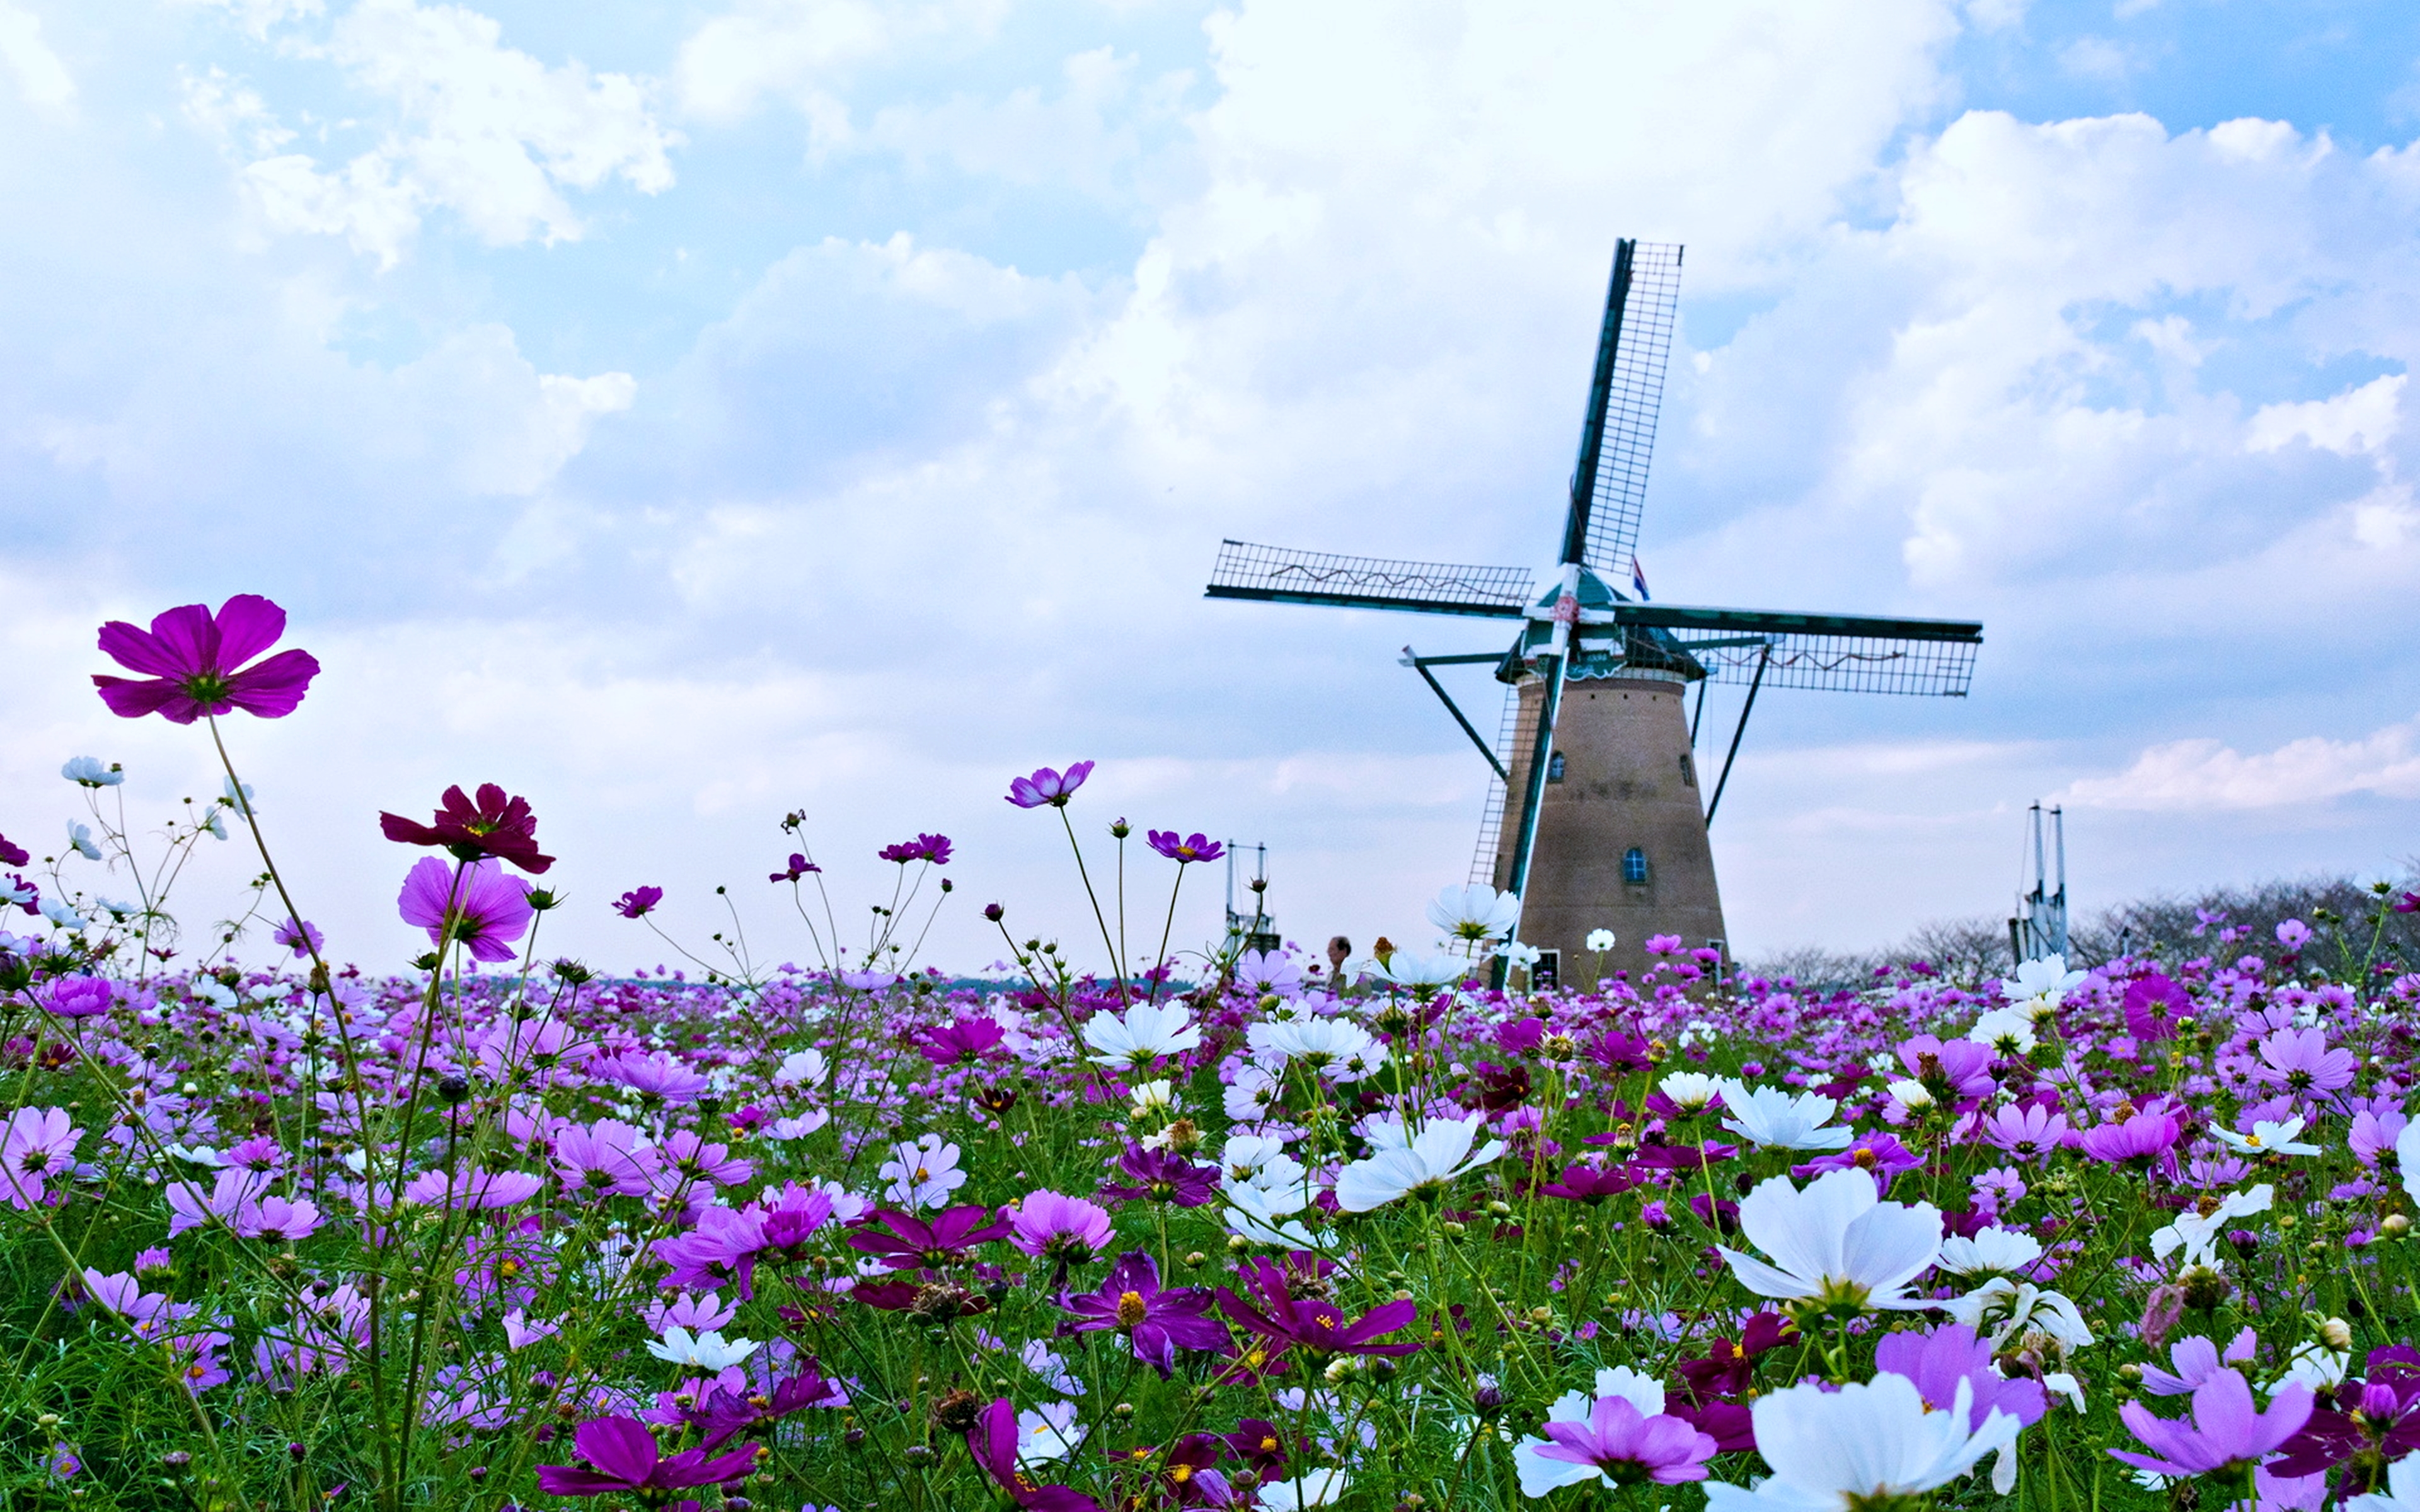 man made, spring, windmill, flower, nature